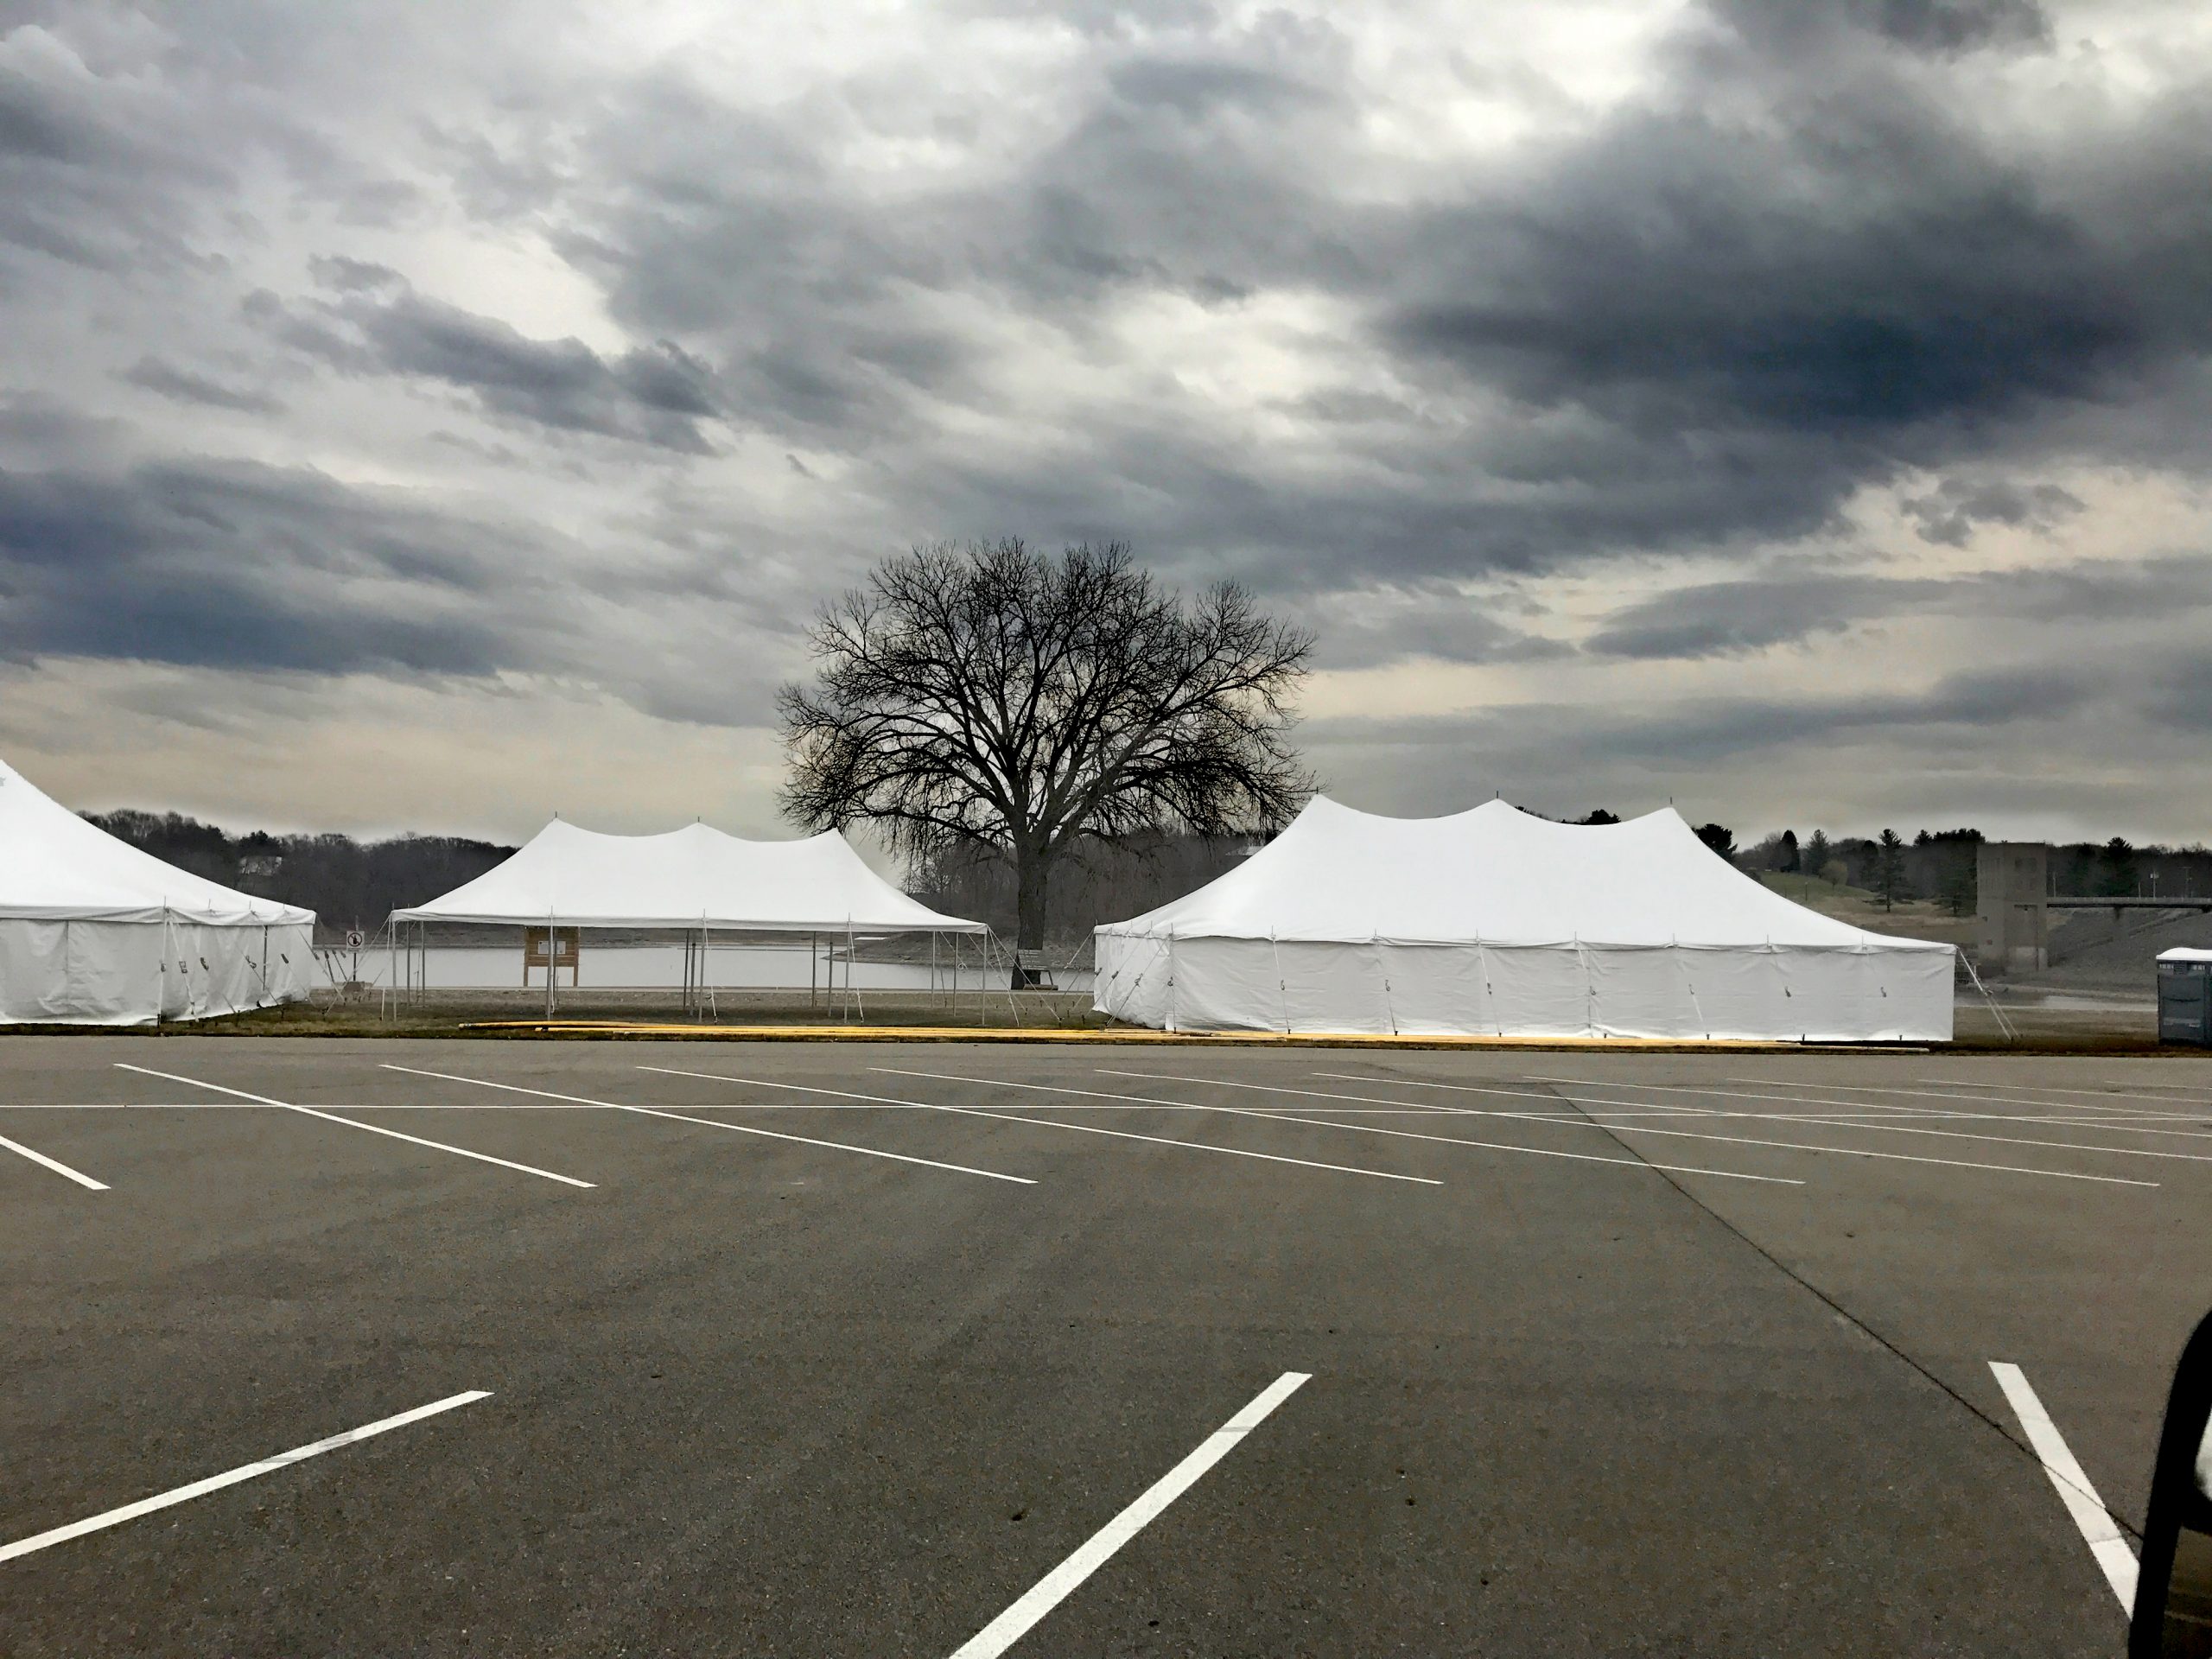 40' x 100' Elite rope and pole tent (left), 20' x 40' rope and pole tent (middle), 30' x 60' rope and pole tent (right)